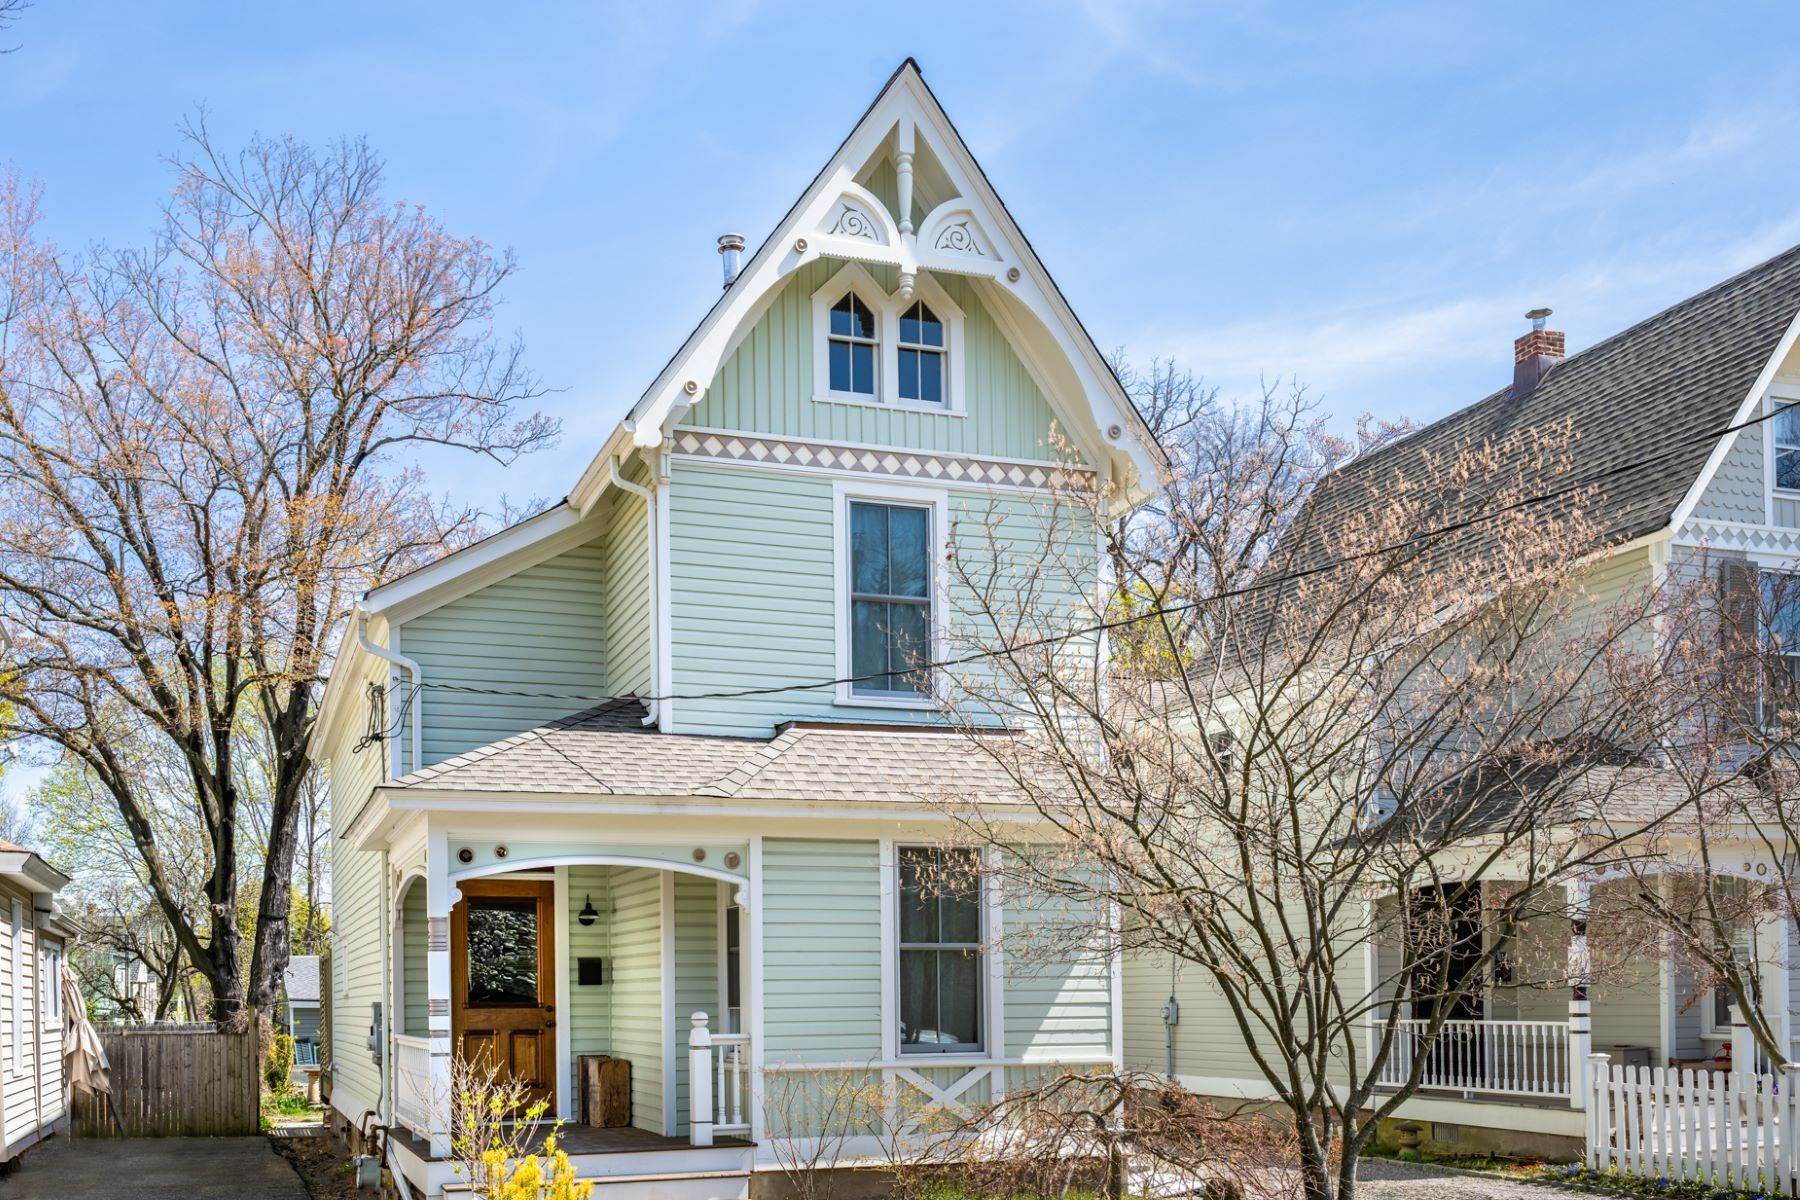 Single Family Homes for Sale at Artfully Renovated Village Victorian 79 Depot Place Nyack, New York 10960 United States